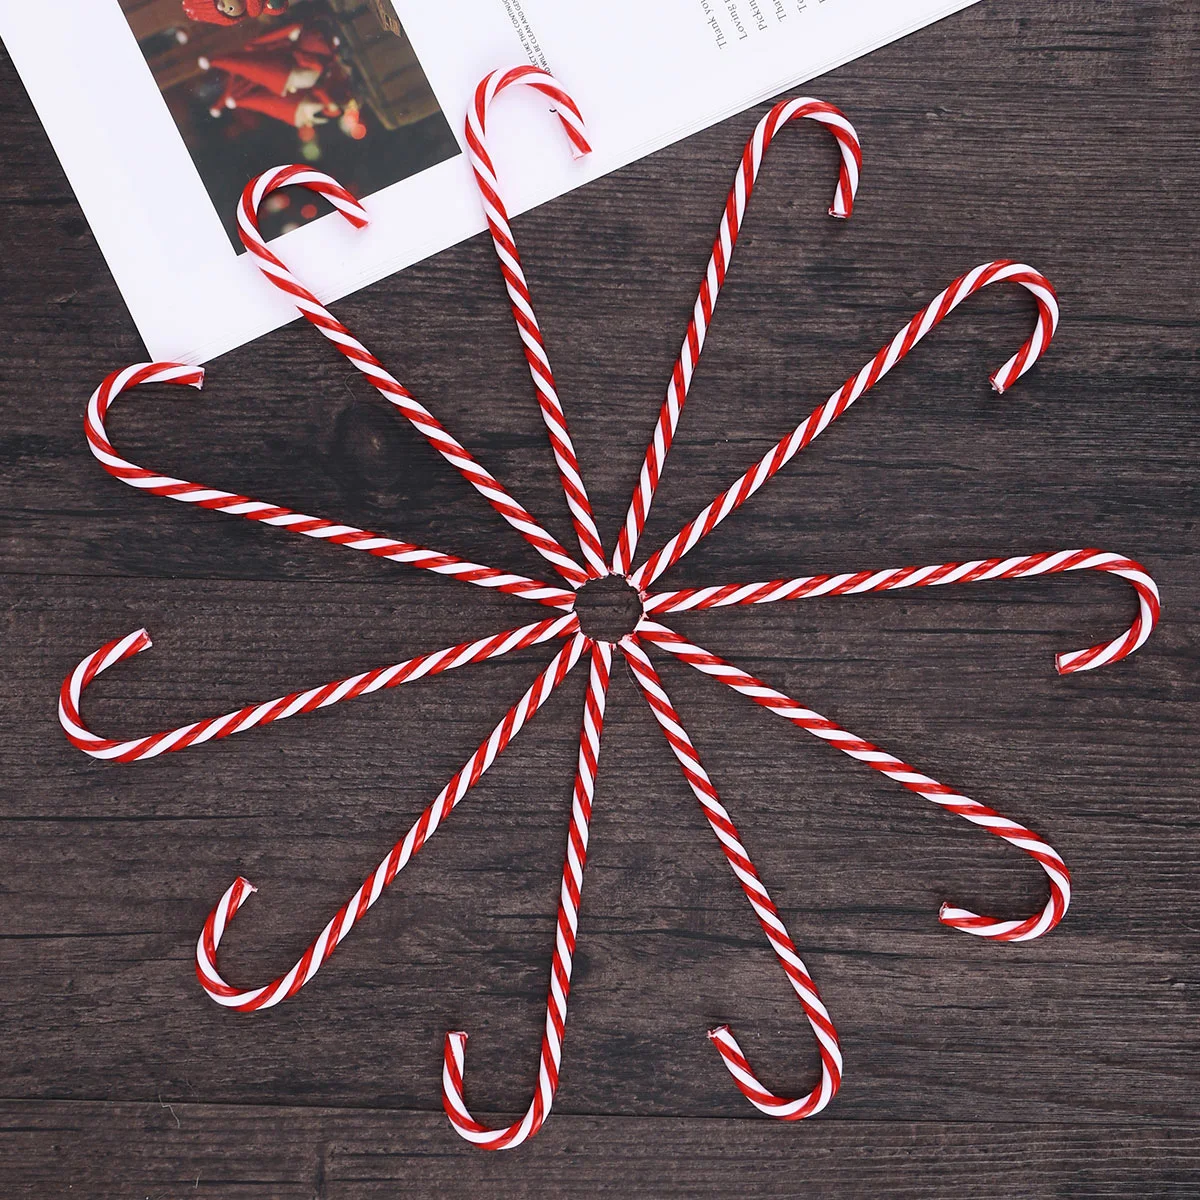 

Christmas Candy Cane Ornaments 18pcs Crutch Hanging Pendant Candy Cane Crafts for Holiday Xmas Tree Wall Fireplace Window